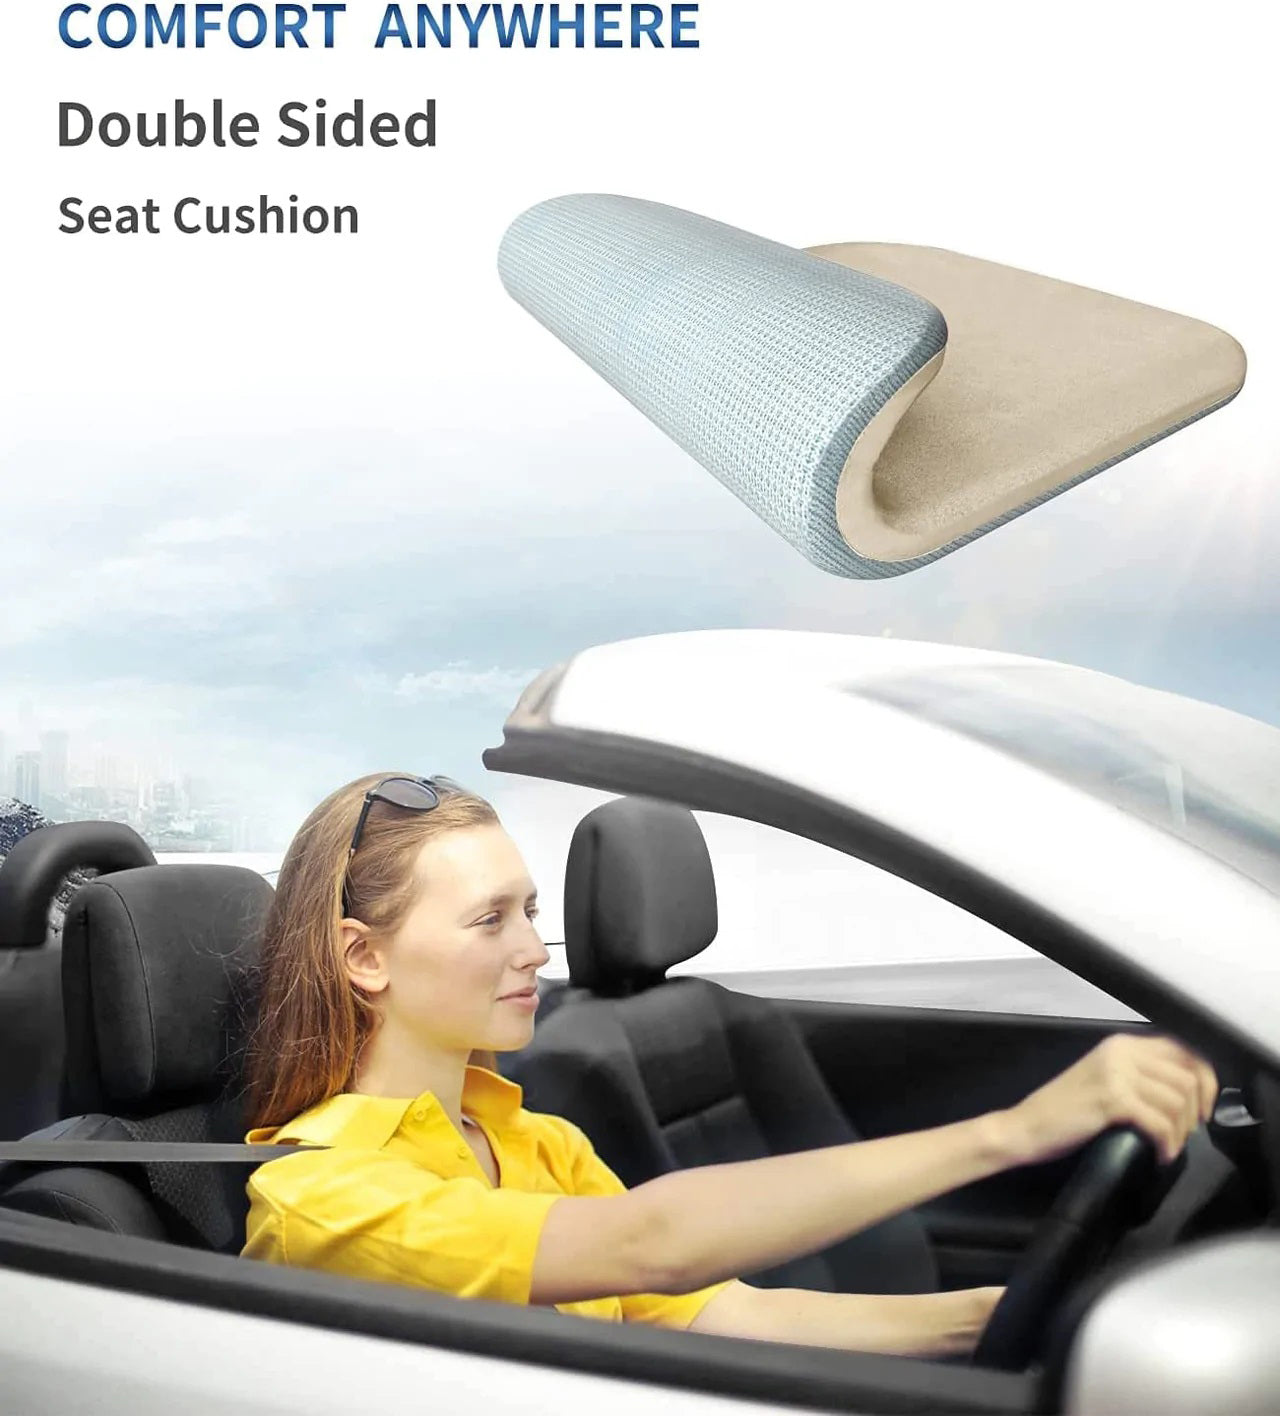 Car Seat Cushion, Custom Fit For Your Cars, Car Memory Foam Seat Cushion, Heightening Seat Cushion, Seat Cushion for Car and Office Chair CC19999